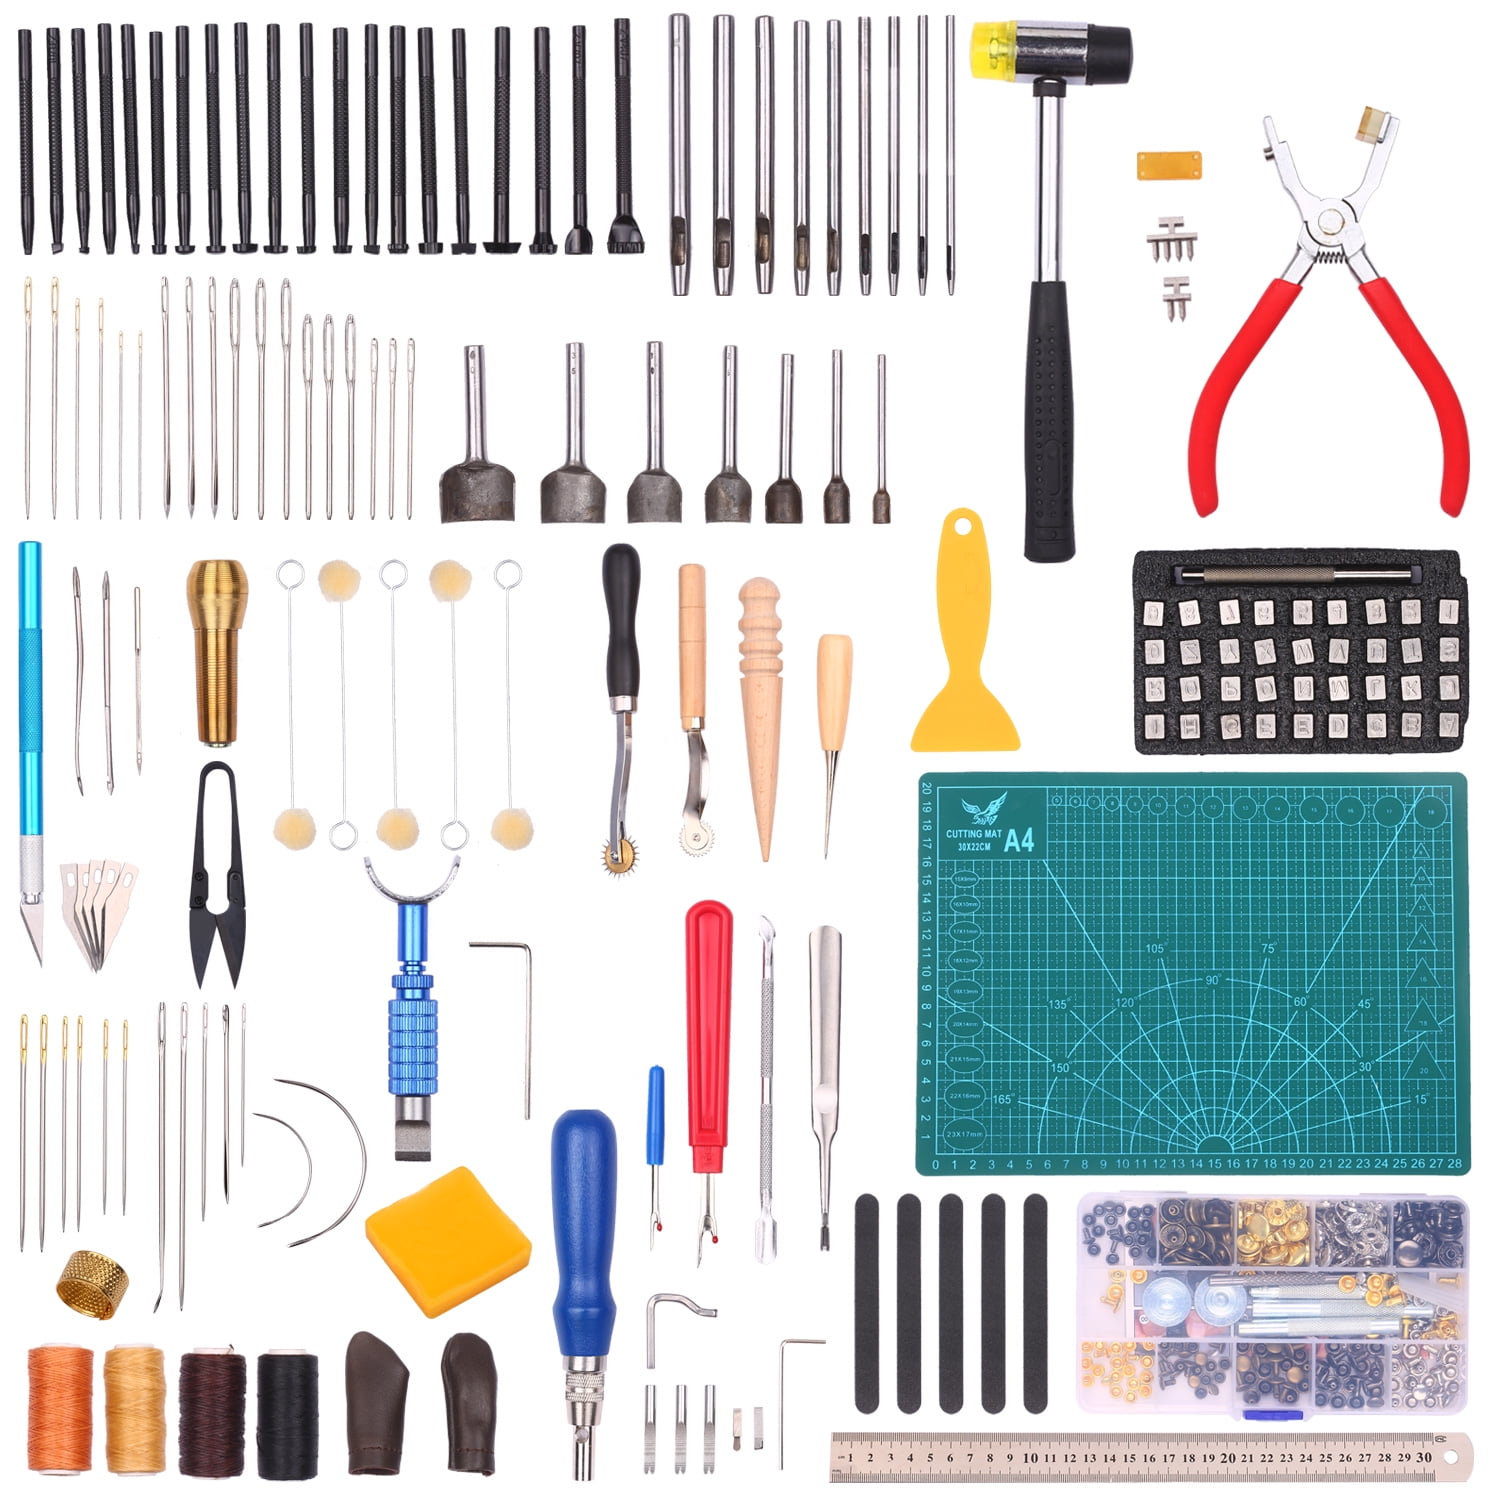 Leathercraft Basic Accessories Tools Kit for Hand Sewing Stitching